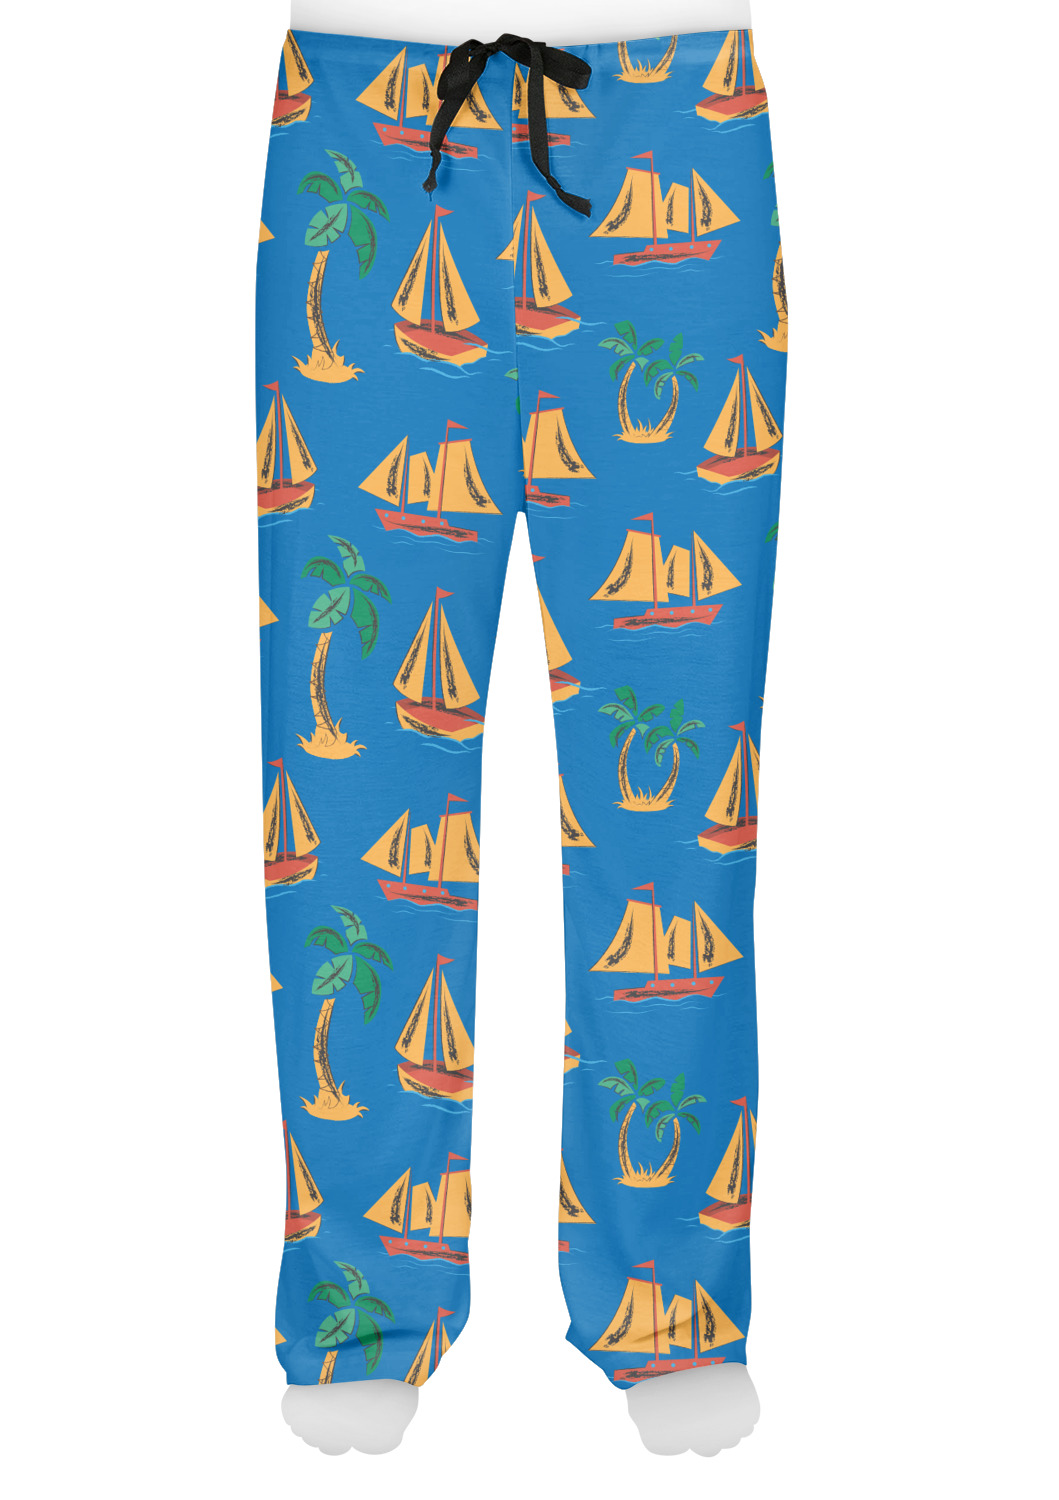 Boats & Palm Trees Mens Pajama Pants - XS (Personalized) - YouCustomizeIt